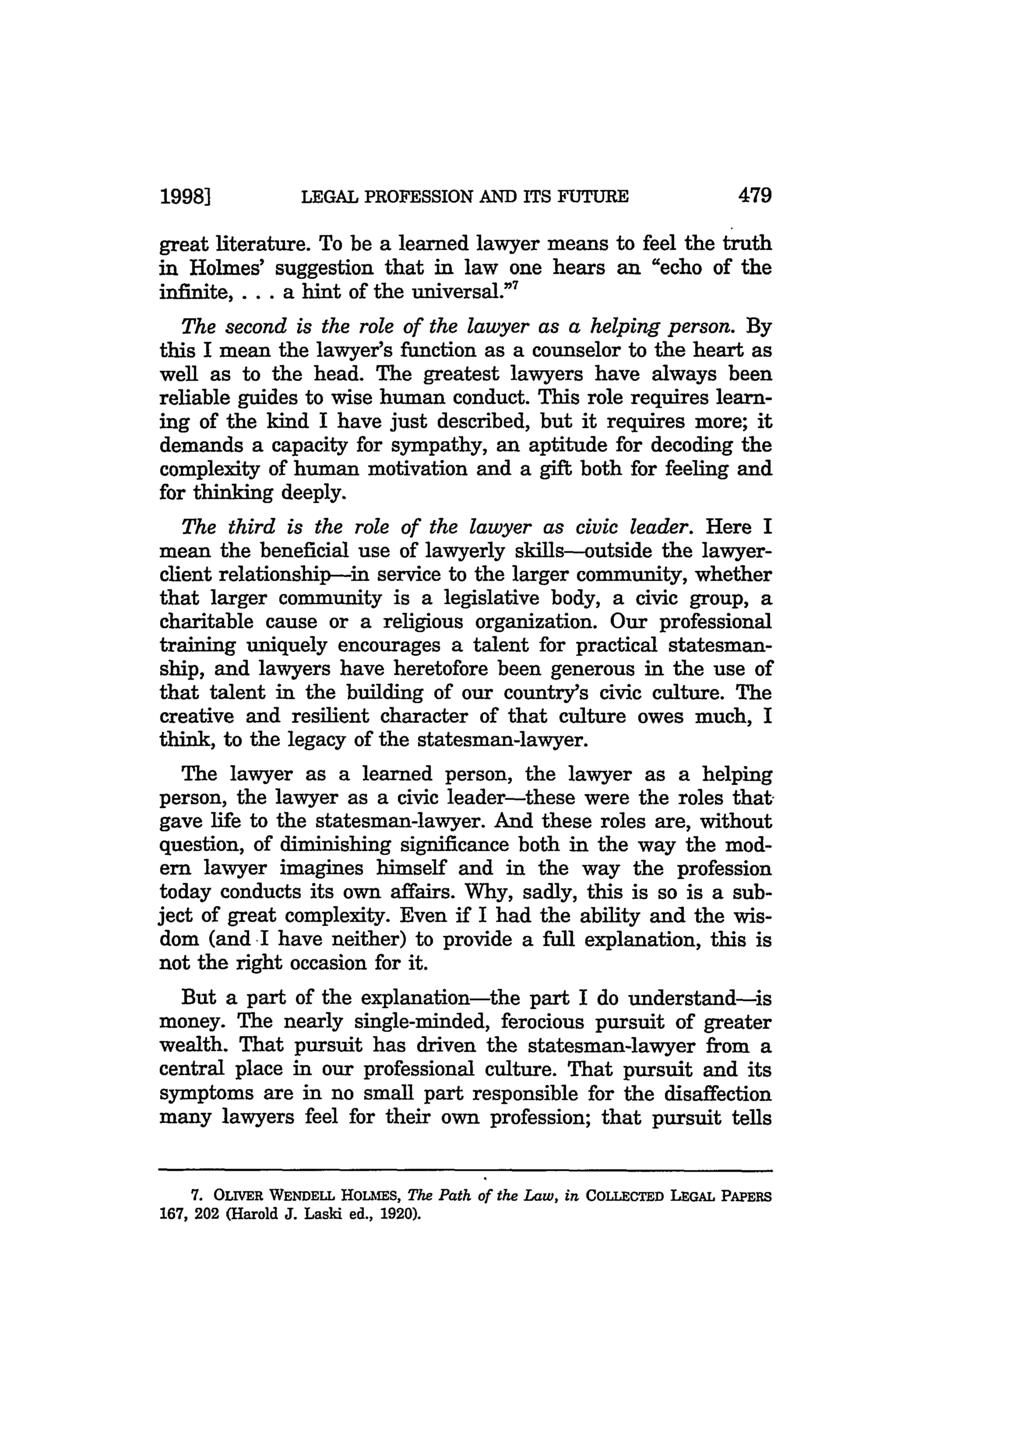 1998] LEGAL PROFESSION AND ITS FUTURE 479 great literature. To be a learned lawyer means to feel the truth in Holmes' suggestion that in law one hears an "echo of the infinite,.